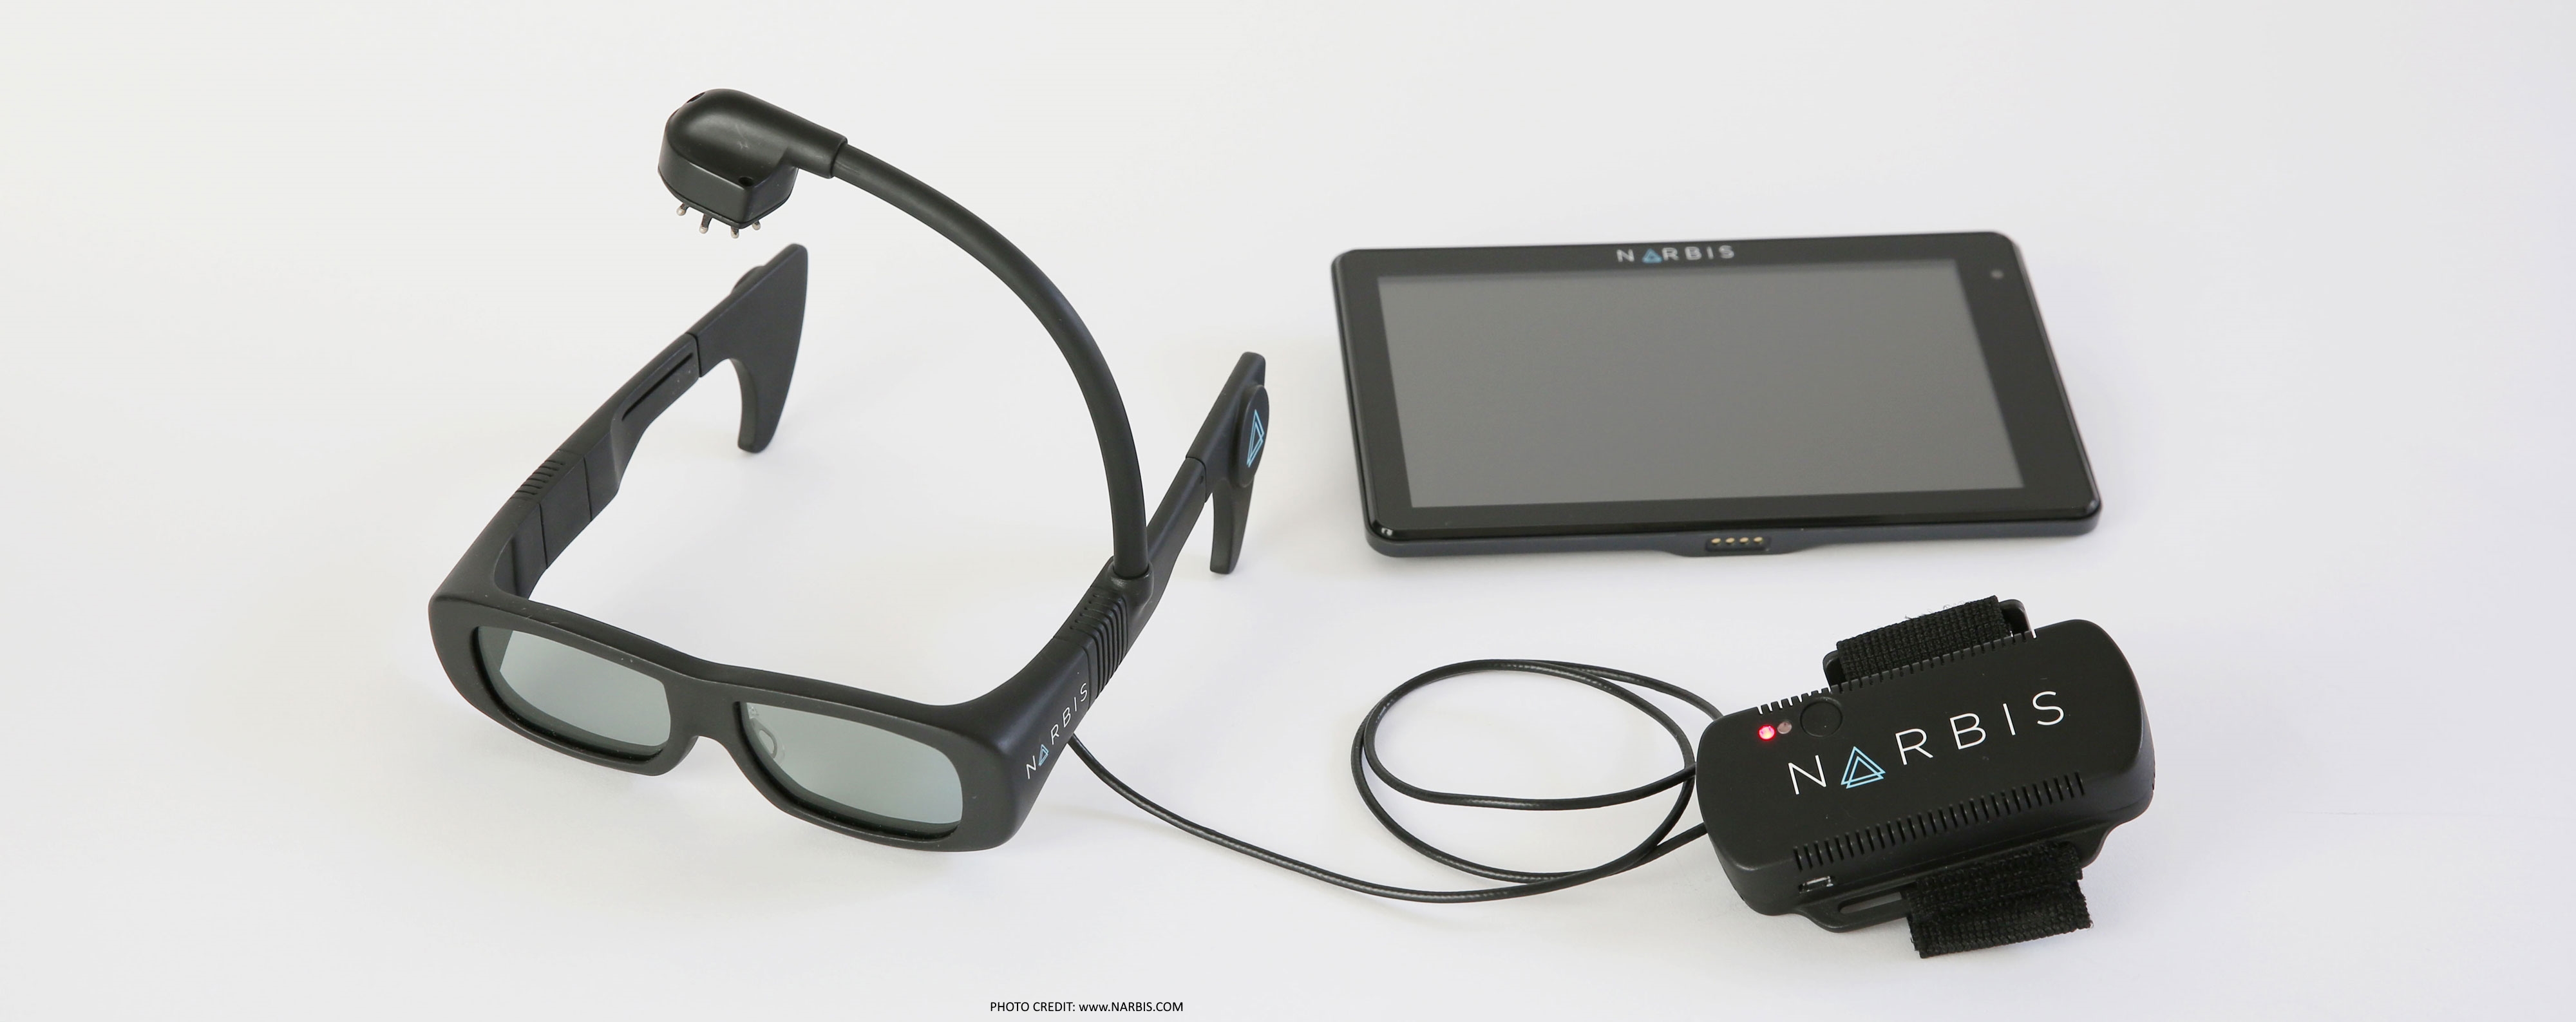 Stay Focused with Narbis Smart Glasses